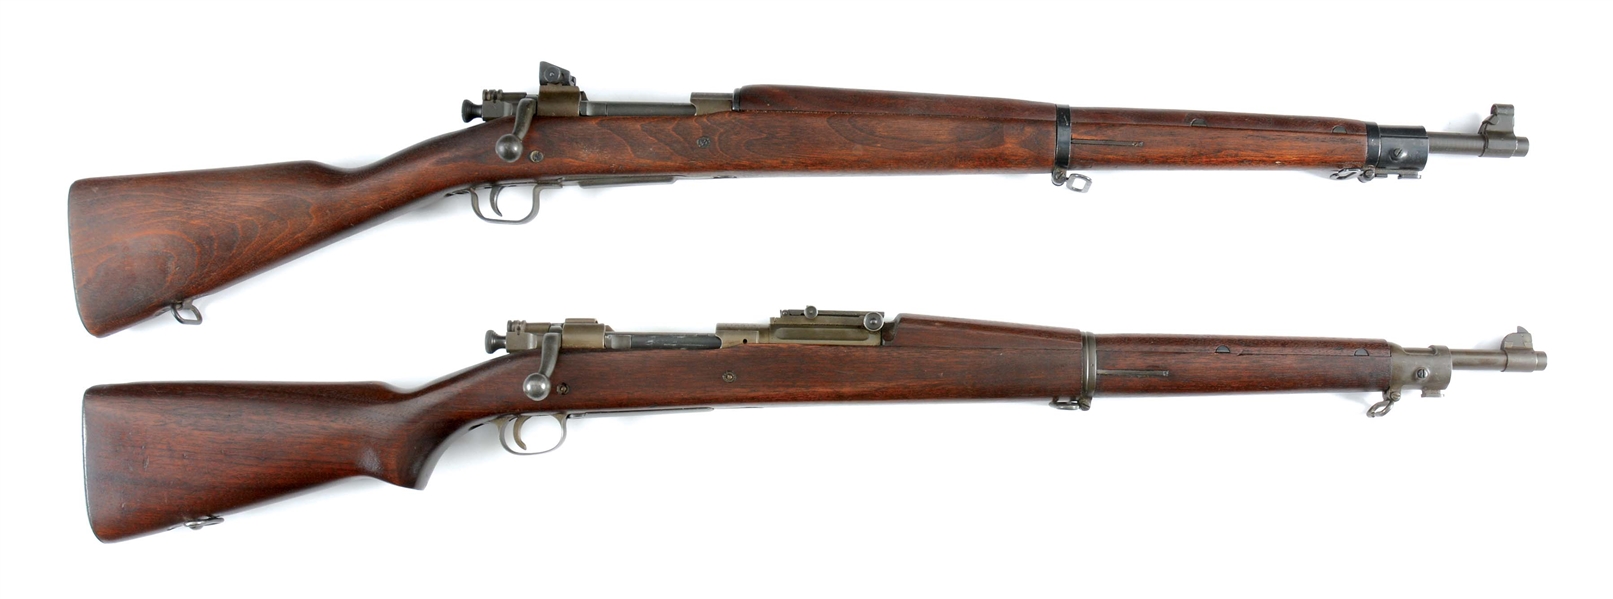 (C) LOT OF TWO: TWO 1903 RIFLES, ONE REMINGTON AND ONE SPRINGFIELD.